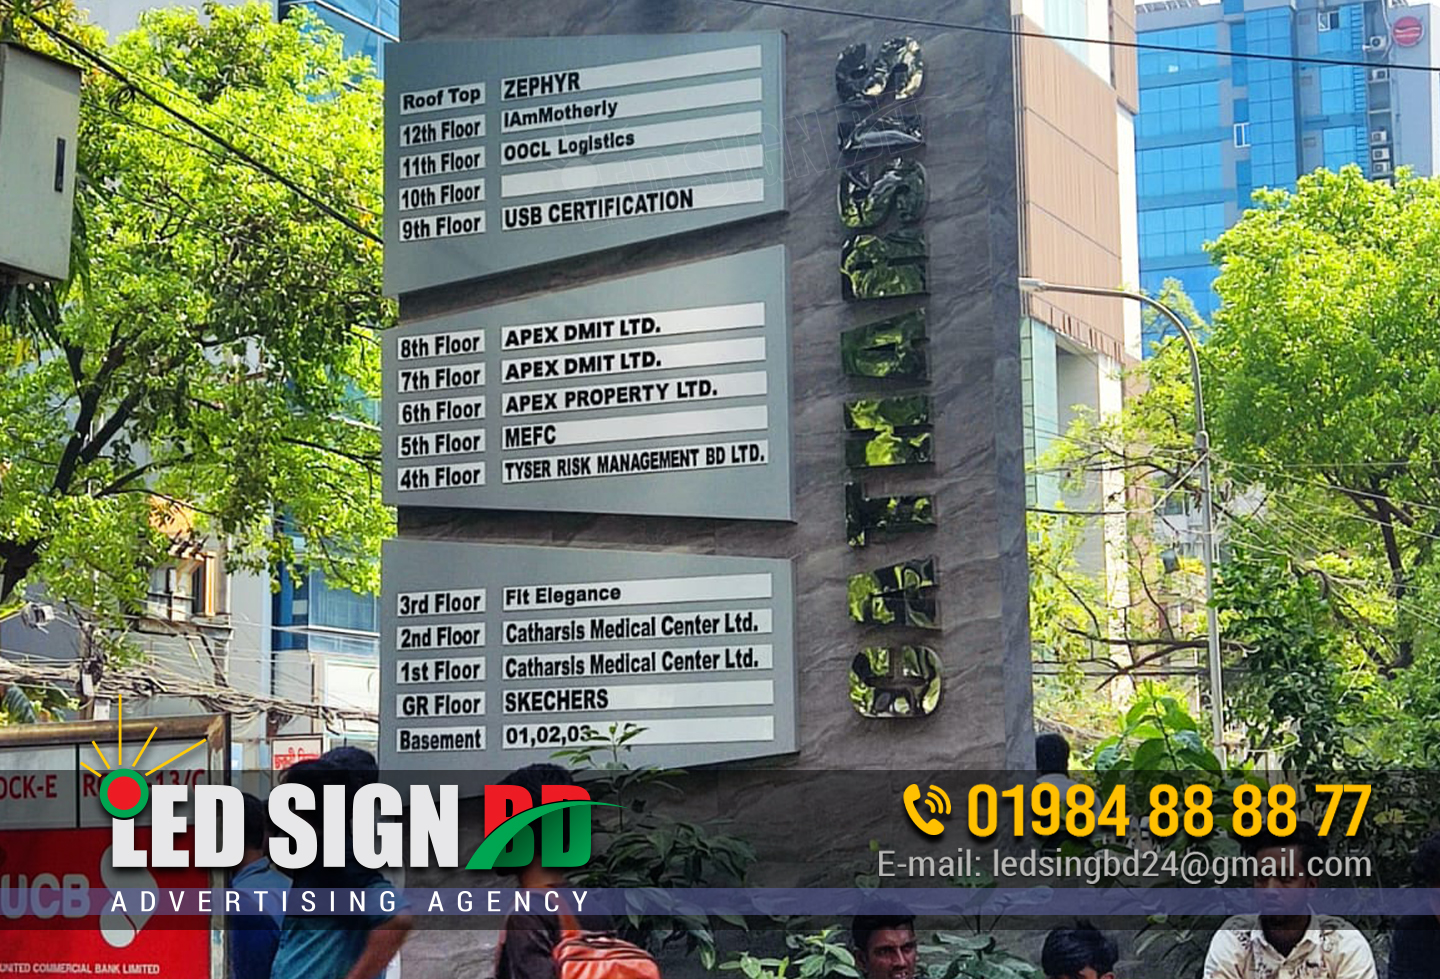 Neon signboard & profile signboard making company in Dhaka Bangladesh. We are the is one of the most trusted and popular signage companies in Bangladesh. They have been providing quality signage solutions to their clients. For many years and have built up a strong reputation in the industry. The company offers a wide range of signage products and services. Including Neon signboards, Profile signboards, 3D signboards, Led signboards, and more. They are also one of the leading suppliers of Signage materials in Bangladesh. Neon signboard & profile signboard making company in Dhaka Bangladesh. Has a team of experienced and skilled professionals. Who are dedicated to providing the best possible signage solutions to their clients. Neon Signboard & Profile Signboard Dhaka. They use the latest technology and equipment to manufacture their products and offer a wide range of customization options to their clients. Their products are made from high-quality materials and are designed to withstand the harshest weather conditions. neon signboard & profile signboard making company in Dhaka Bangladesh offers a wide range of products and services that are sure to meet the signage needs of any business. They are a one-stop-shop for all your signage needs and their team of experts are always on hand to offer advice and assistance. If you are looking for. Neon Signboard & Profile Signboard Dhaka Neon Signboard & Profile Signboard Dhaka Introducing Neon Signboard & Profile Signboard Making Company in Dhaka Bangladesh In the world of signage, there are few things more eye-catching than a neon sign. Whether it’s a advertising a business, announcing a special event, or simply adding some light to a dark room, neon signs have a way of capturing attention. That’s why, when it comes to sign making, Neon Signboard & Profile Signboard Making Company in Dhaka Bangladesh is a name you can trust. With over 20 years of experience in the sign making industry, Neon Signboard & Profile Signboard Making Company has the knowledge and expertise to create any kind of sign you need. From simple designs to complex, multi-colored signs, their team of highly skilled professionals can create a sign that’s perfect for your business or event. What’s more, Neon Signboard & Profile Signboard Making Company offers a wide range of sign making services, meaning they can handle everything from the initial design to the final installation. So whether you need a new sign for your business or you’re looking to revamp your current signage, Neon Signboard & Profile Signboard Making Company is the perfect partner for the job. The company’s history and how it has become a leading signboard maker in Bangladesh In the early days, the company started out as a small family business making Neon signboards by hand. As the business grew, they began to invest in machinery to help with production. Eventually, they became a leading signboard maker in Bangladesh, thanks to their commitment to quality and customer service. Neon signboards are a popular way to advertise in Bangladesh, and the company has become known for their eye-catching and well-made signs. They use the latest technology and equipment to make sure their signs are of the highest quality. They also offer a wide range of services, from design to installation. The company has a team of skilled workers who are passionate about what they do. They are always striving to improve their products and services. This commitment to excellence has made the company a top choice for businesses in Bangladesh. The types of signboards the company produces A neon signboard is a complete advertising solution that can be used for shop signs, company logos, and other types of signage. It is a cost-effective and durable option that is sure to grab attention. A profile signboard, on the other hand, is perfect for those who want to add a touch of class to their business establishment. It can be made from a variety of materials, including wood, metal, glass, and acrylic. The company’s commitment to quality and customer satisfaction Bangladesh Neon Signboard & Profile Signboard Manufacturing Company is committed to providing the highest quality products and services to our customers. We constantly strive to improve our products and services to meet the ever-changing needs of our customers. Our goal is to provide our customers with the best possible products and services available. We believe that our commitment to quality and customer satisfaction is the key to our success. Dedicated to providing our customers with the best possible products and services available. We believe that our commitment to quality and customer satisfaction is the key to our success. Why Neon Signboard & Profile Signboard Making Company is the best choice for signboard needs in Bangladesh There are many reasons to choose Neon Signboard & Profile Signboard Making Company for all of your signboard needs in Bangladesh. Here are just a few: 1. We are a highly experienced and professional team. We have been in the business of designing, manufacturing and installing all types of signboards for over 15 years. 2. Led Sign BD Ltd use the latest technology and equipment to create high quality signboards that are sure to grab attention. 3. We offer a wide range of signboard services, from design and consultation to installation and maintenance. 4. We have a strong focus on customer satisfaction and always go the extra mile to ensure our clients are happy with the end result. 5. We are competitively priced and offer great value for money. If you are looking for a reliable, professional and affordable signboard company in Bangladesh, then look no further than Neon Signboard & Profile Signboard Making Company. Contact us today to discuss your signboard needs. In conclusion, it can be seen that neon signboard and profile signboard making company are two very important companies in Dhaka, Bangladesh. They both provide very important services to their clients and customers. Neon signboard making company provides services such as designing, manufacturing and installation of neon signboards. Profile signboard making company provides services such as designing, manufacturing and installation of profile signboards.